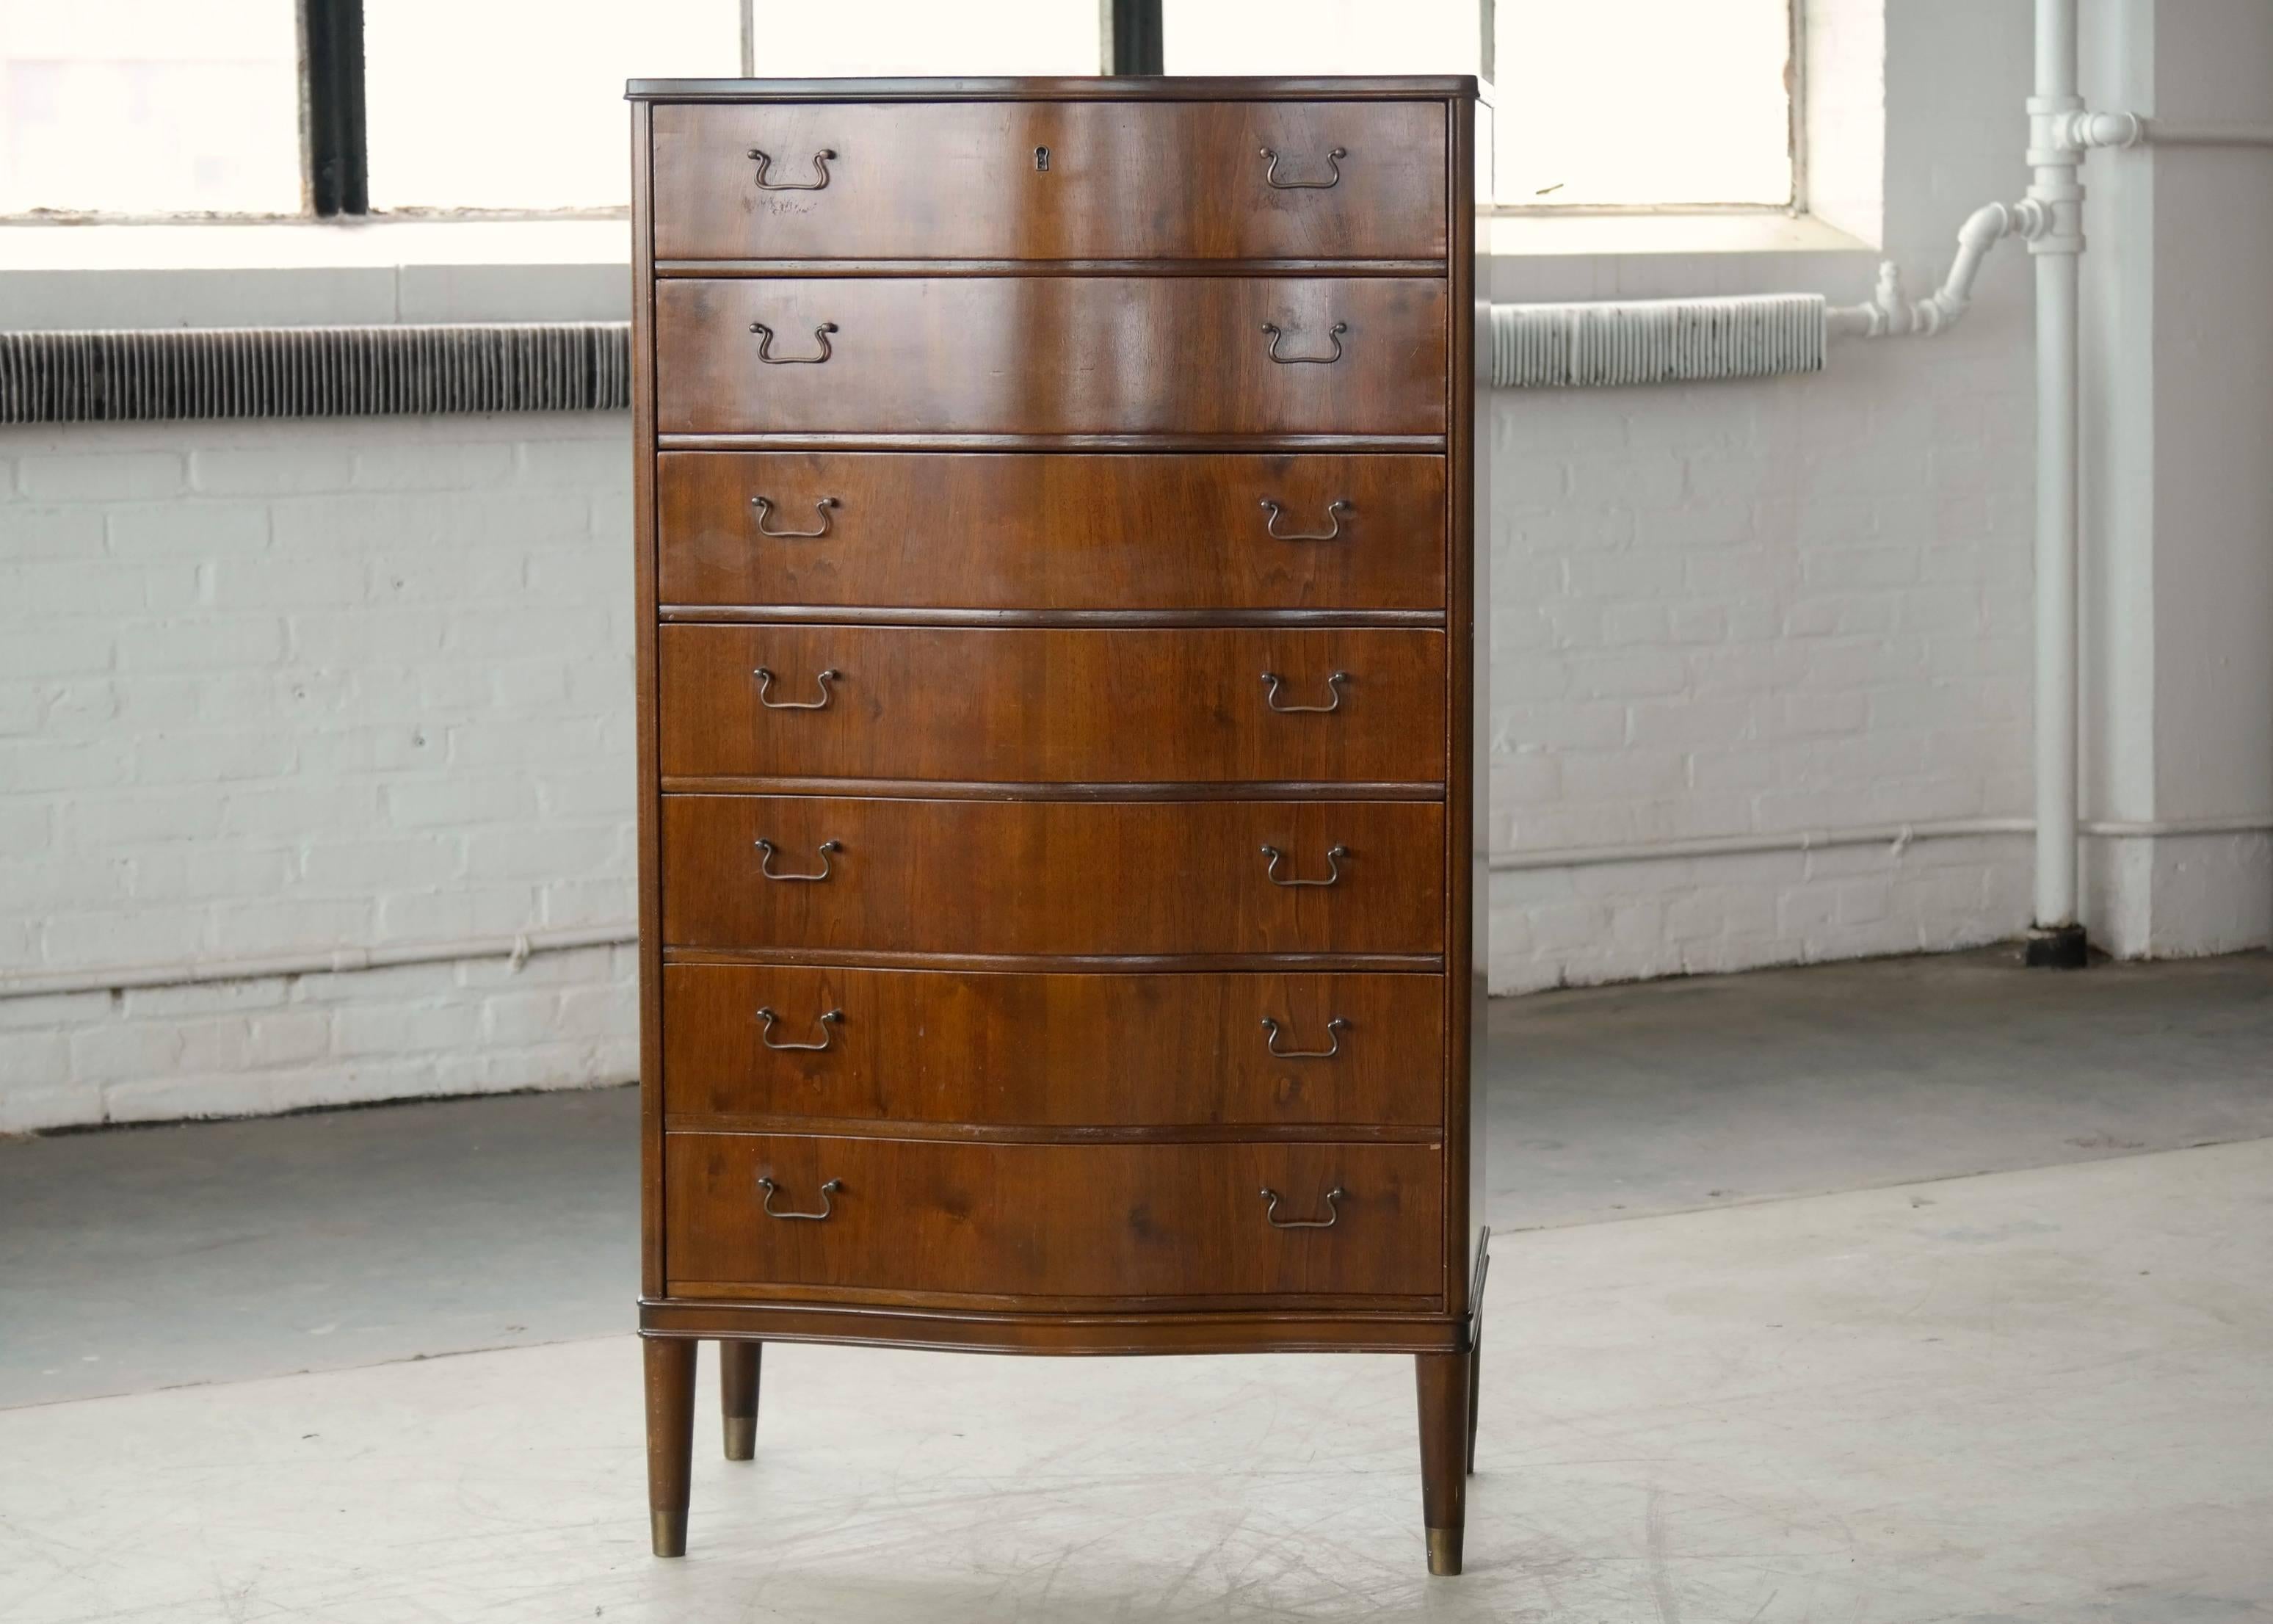 Ultra stylish dresser in walnut with brass pulls. Made in Denmark in the 1950s very much in the style of Frits Henningsen. Overall very good condition showing only minor age appropriate wear.

 